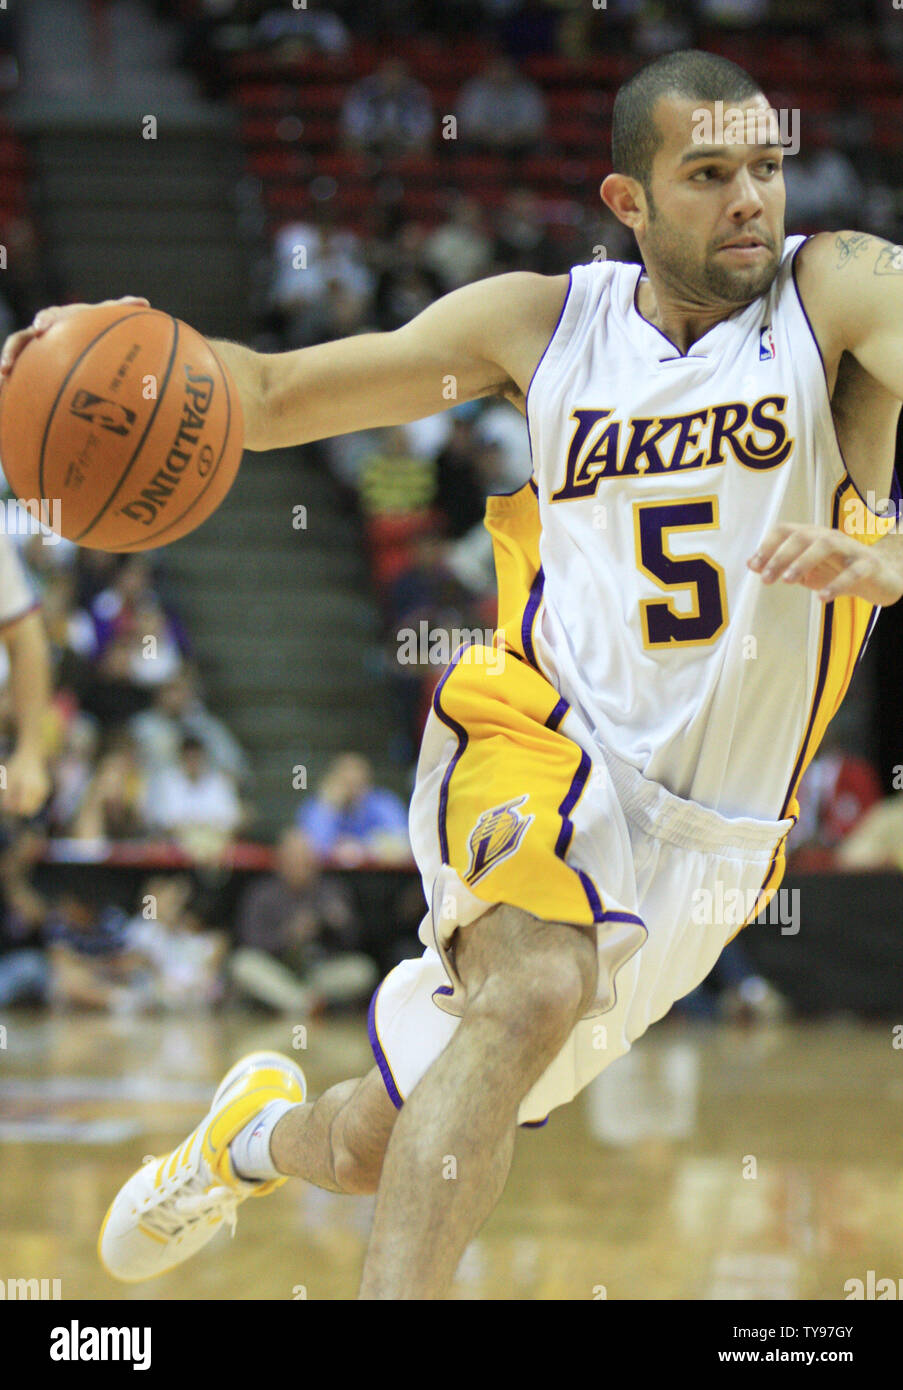 Los Angeles Clippers: Jordan Farmar Agrees To Deal